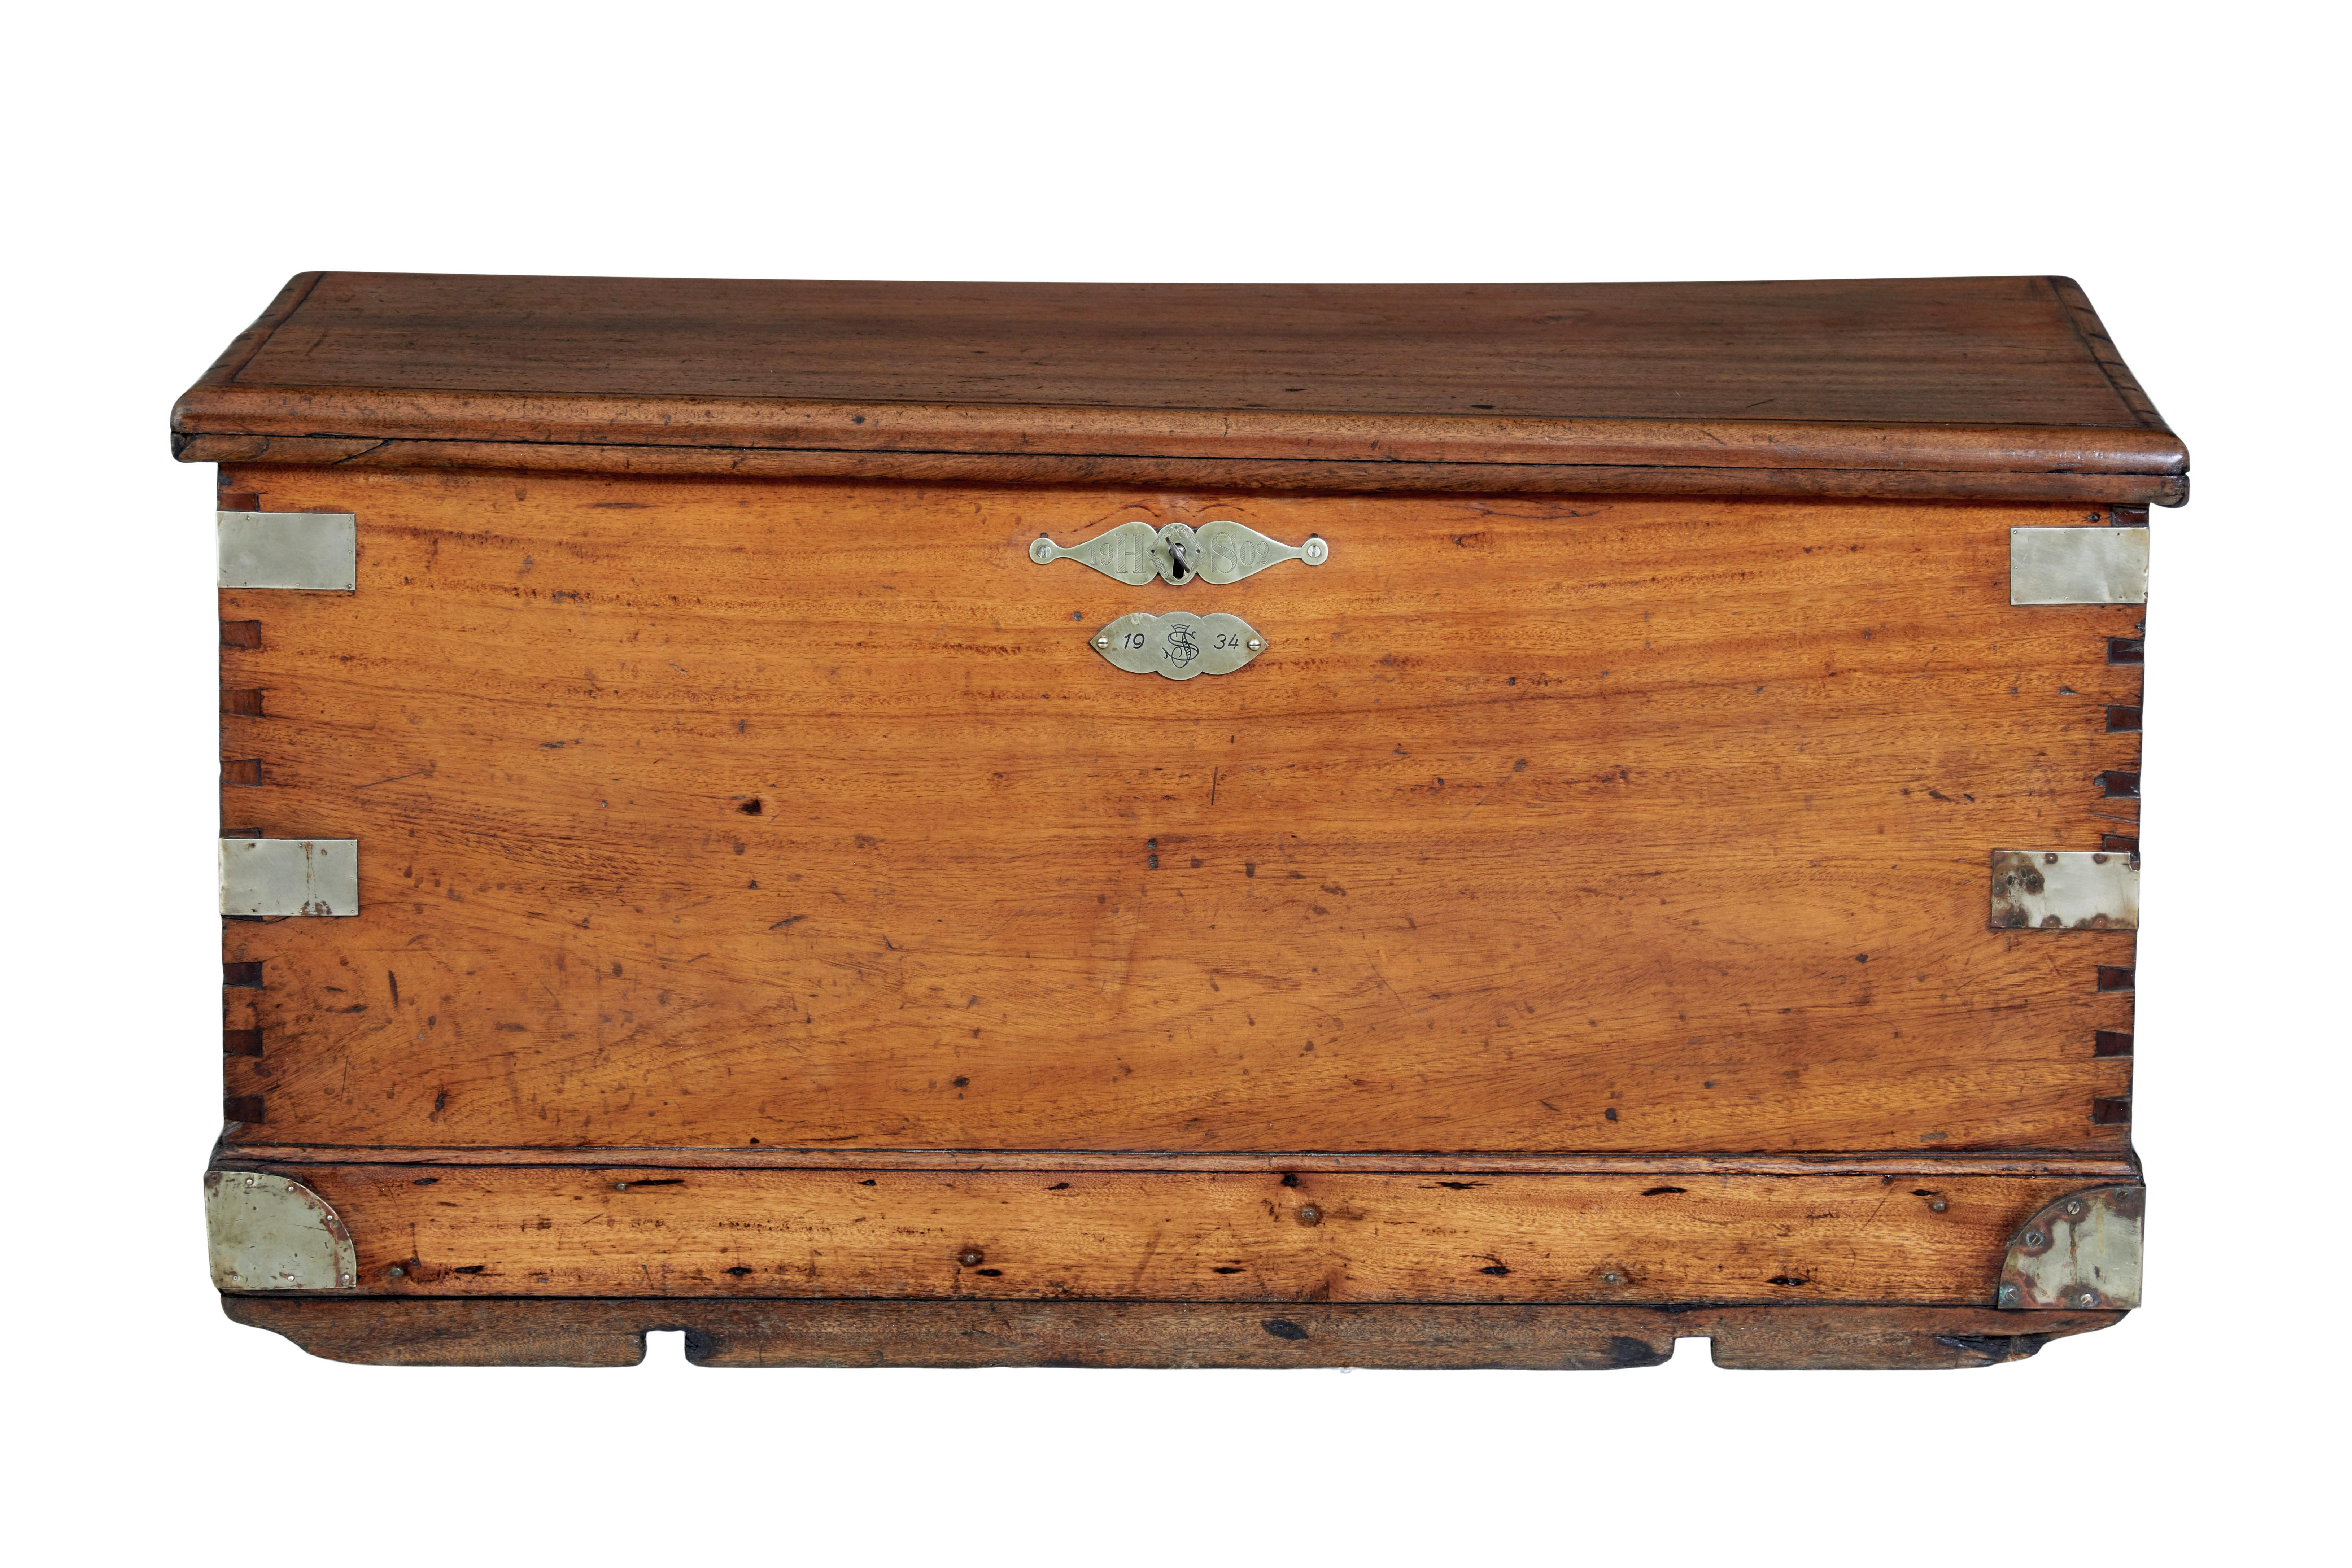 19th century continental mahogany maritime chest circa 1870.

Rare german maritime sailors chest with hand painted interior lid.

Mahogany exterior with brass strap work. Working lock and key with a brass escutheon plate engraved with the initials